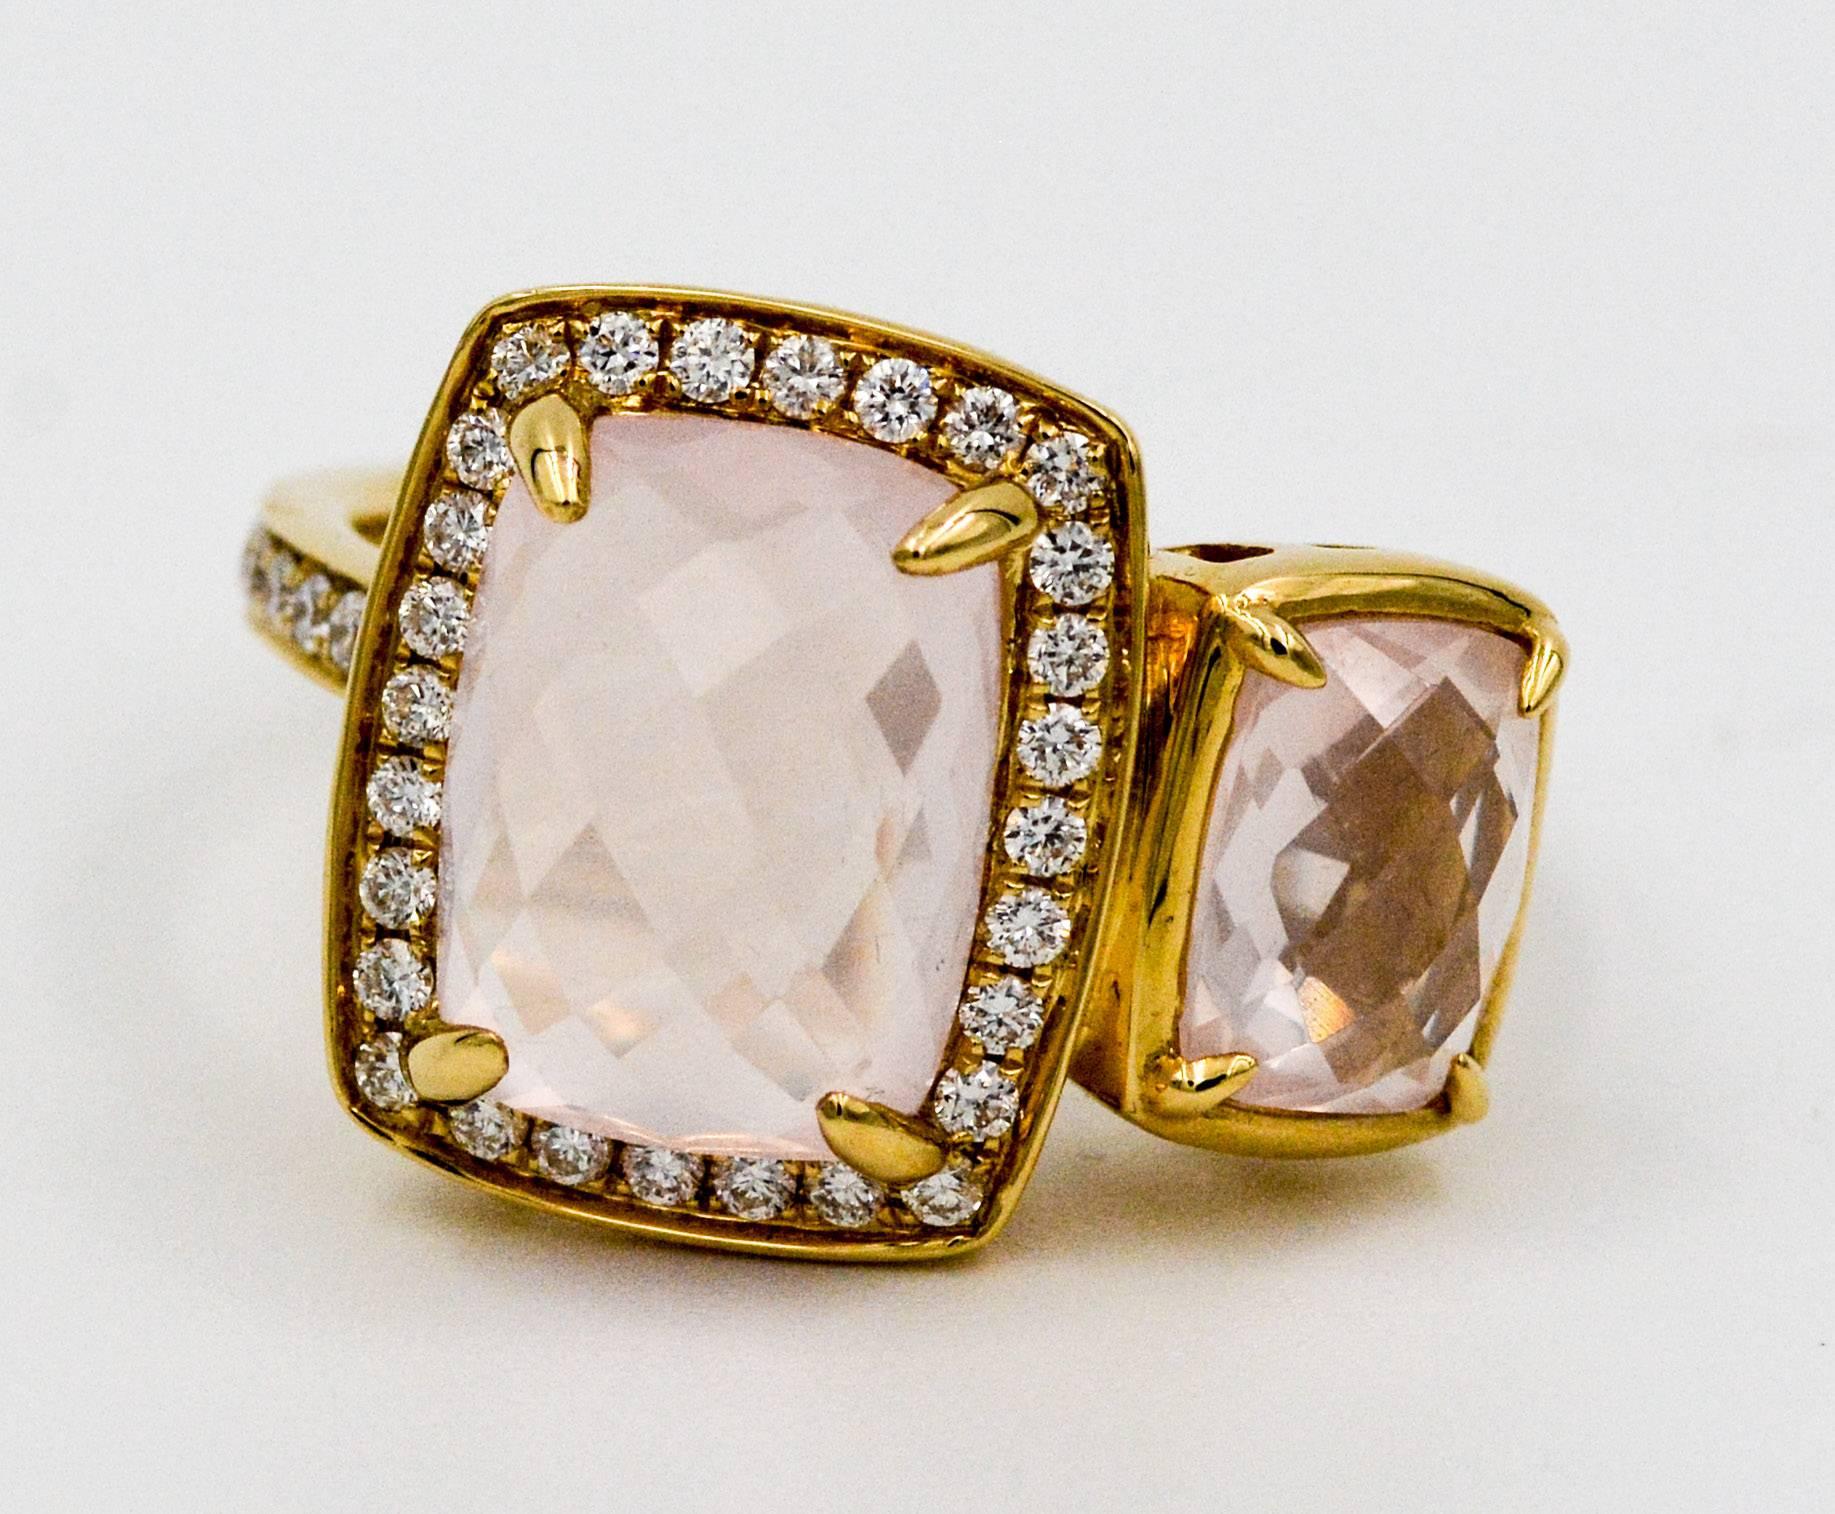 An elegant and showy modern asymmetrical 18 karat yellow gold ring from Katie Decker, set with two faceted cushion cut rose quartz, 5.50 carats total weight, and accented with round brilliant cut diamonds weighing .45 carat total. The diamonds are